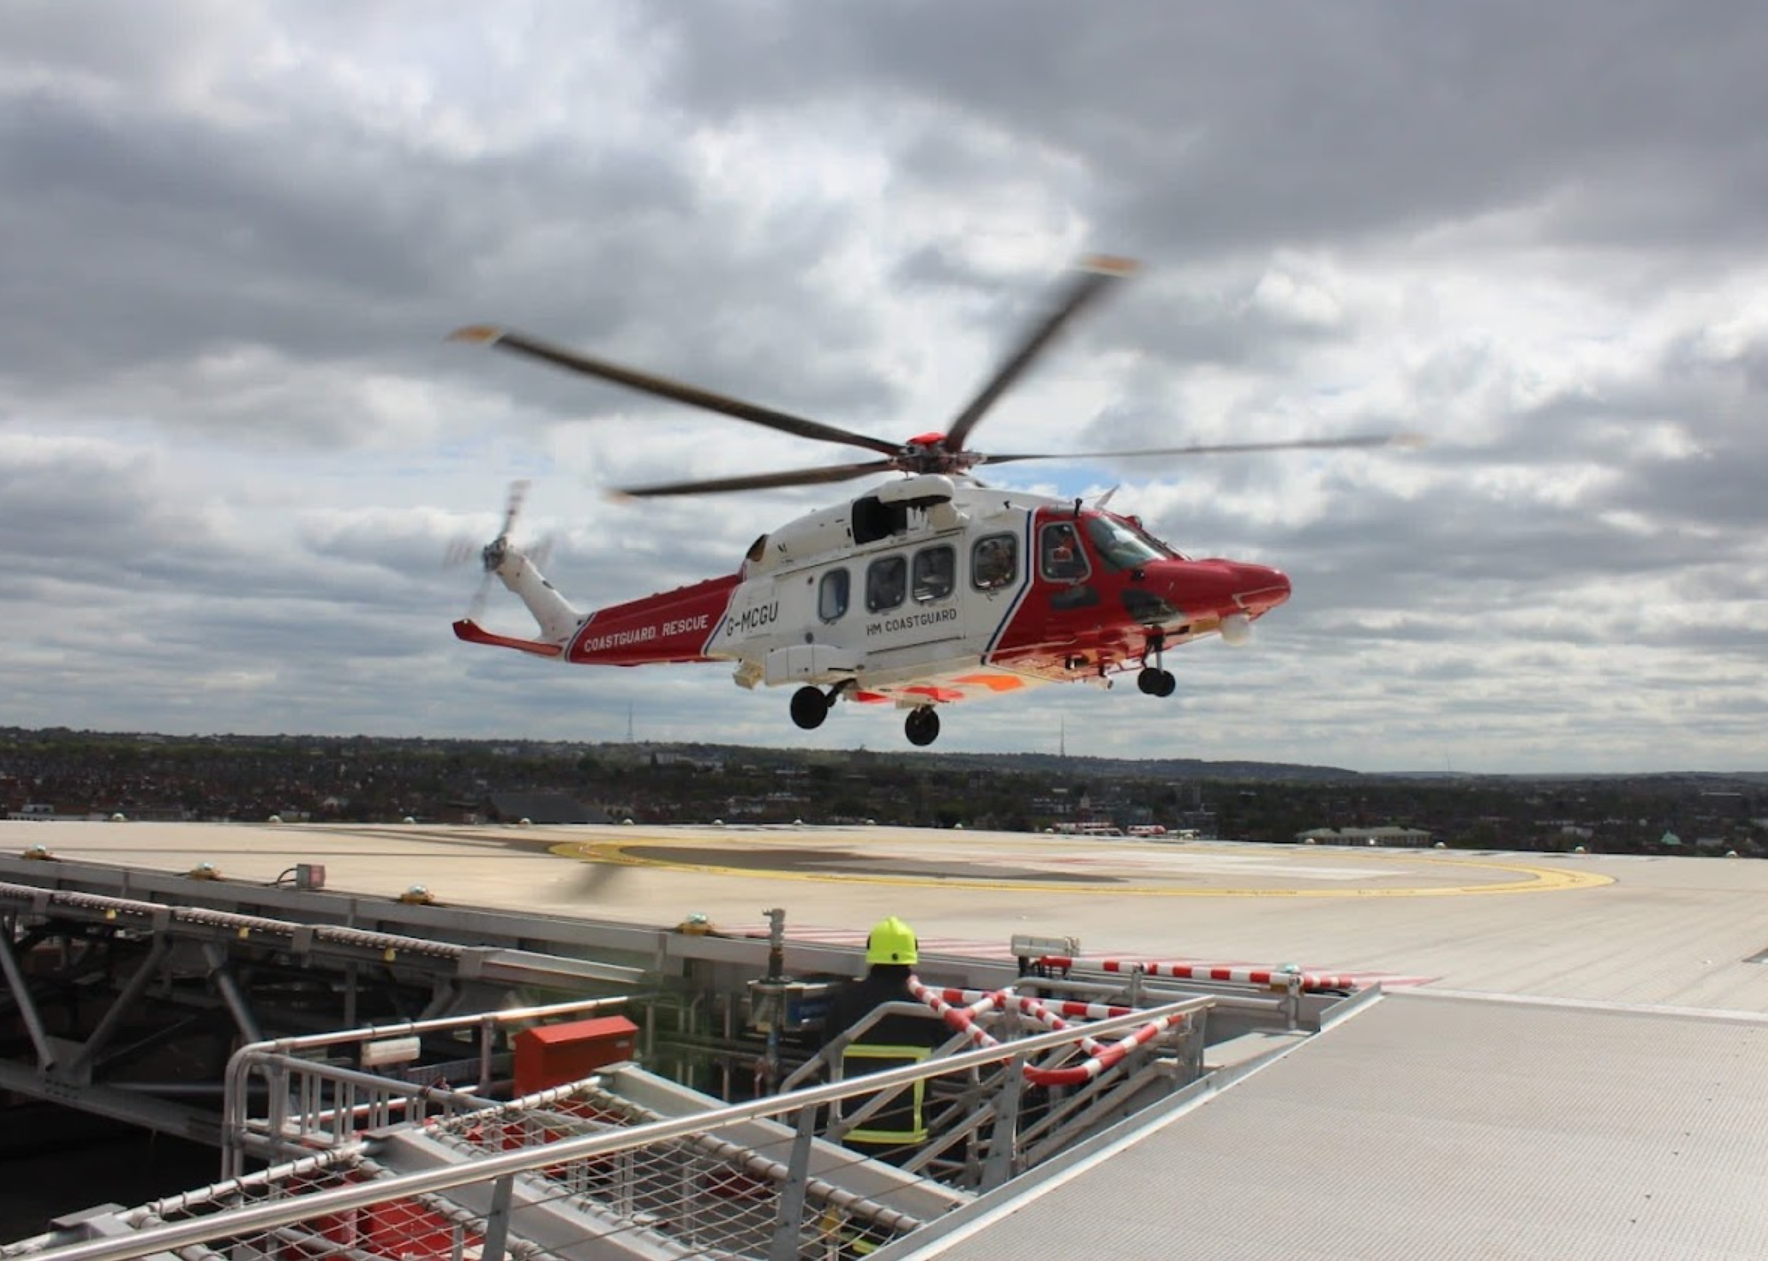 St Georges Hospital London Helipad with helicopter